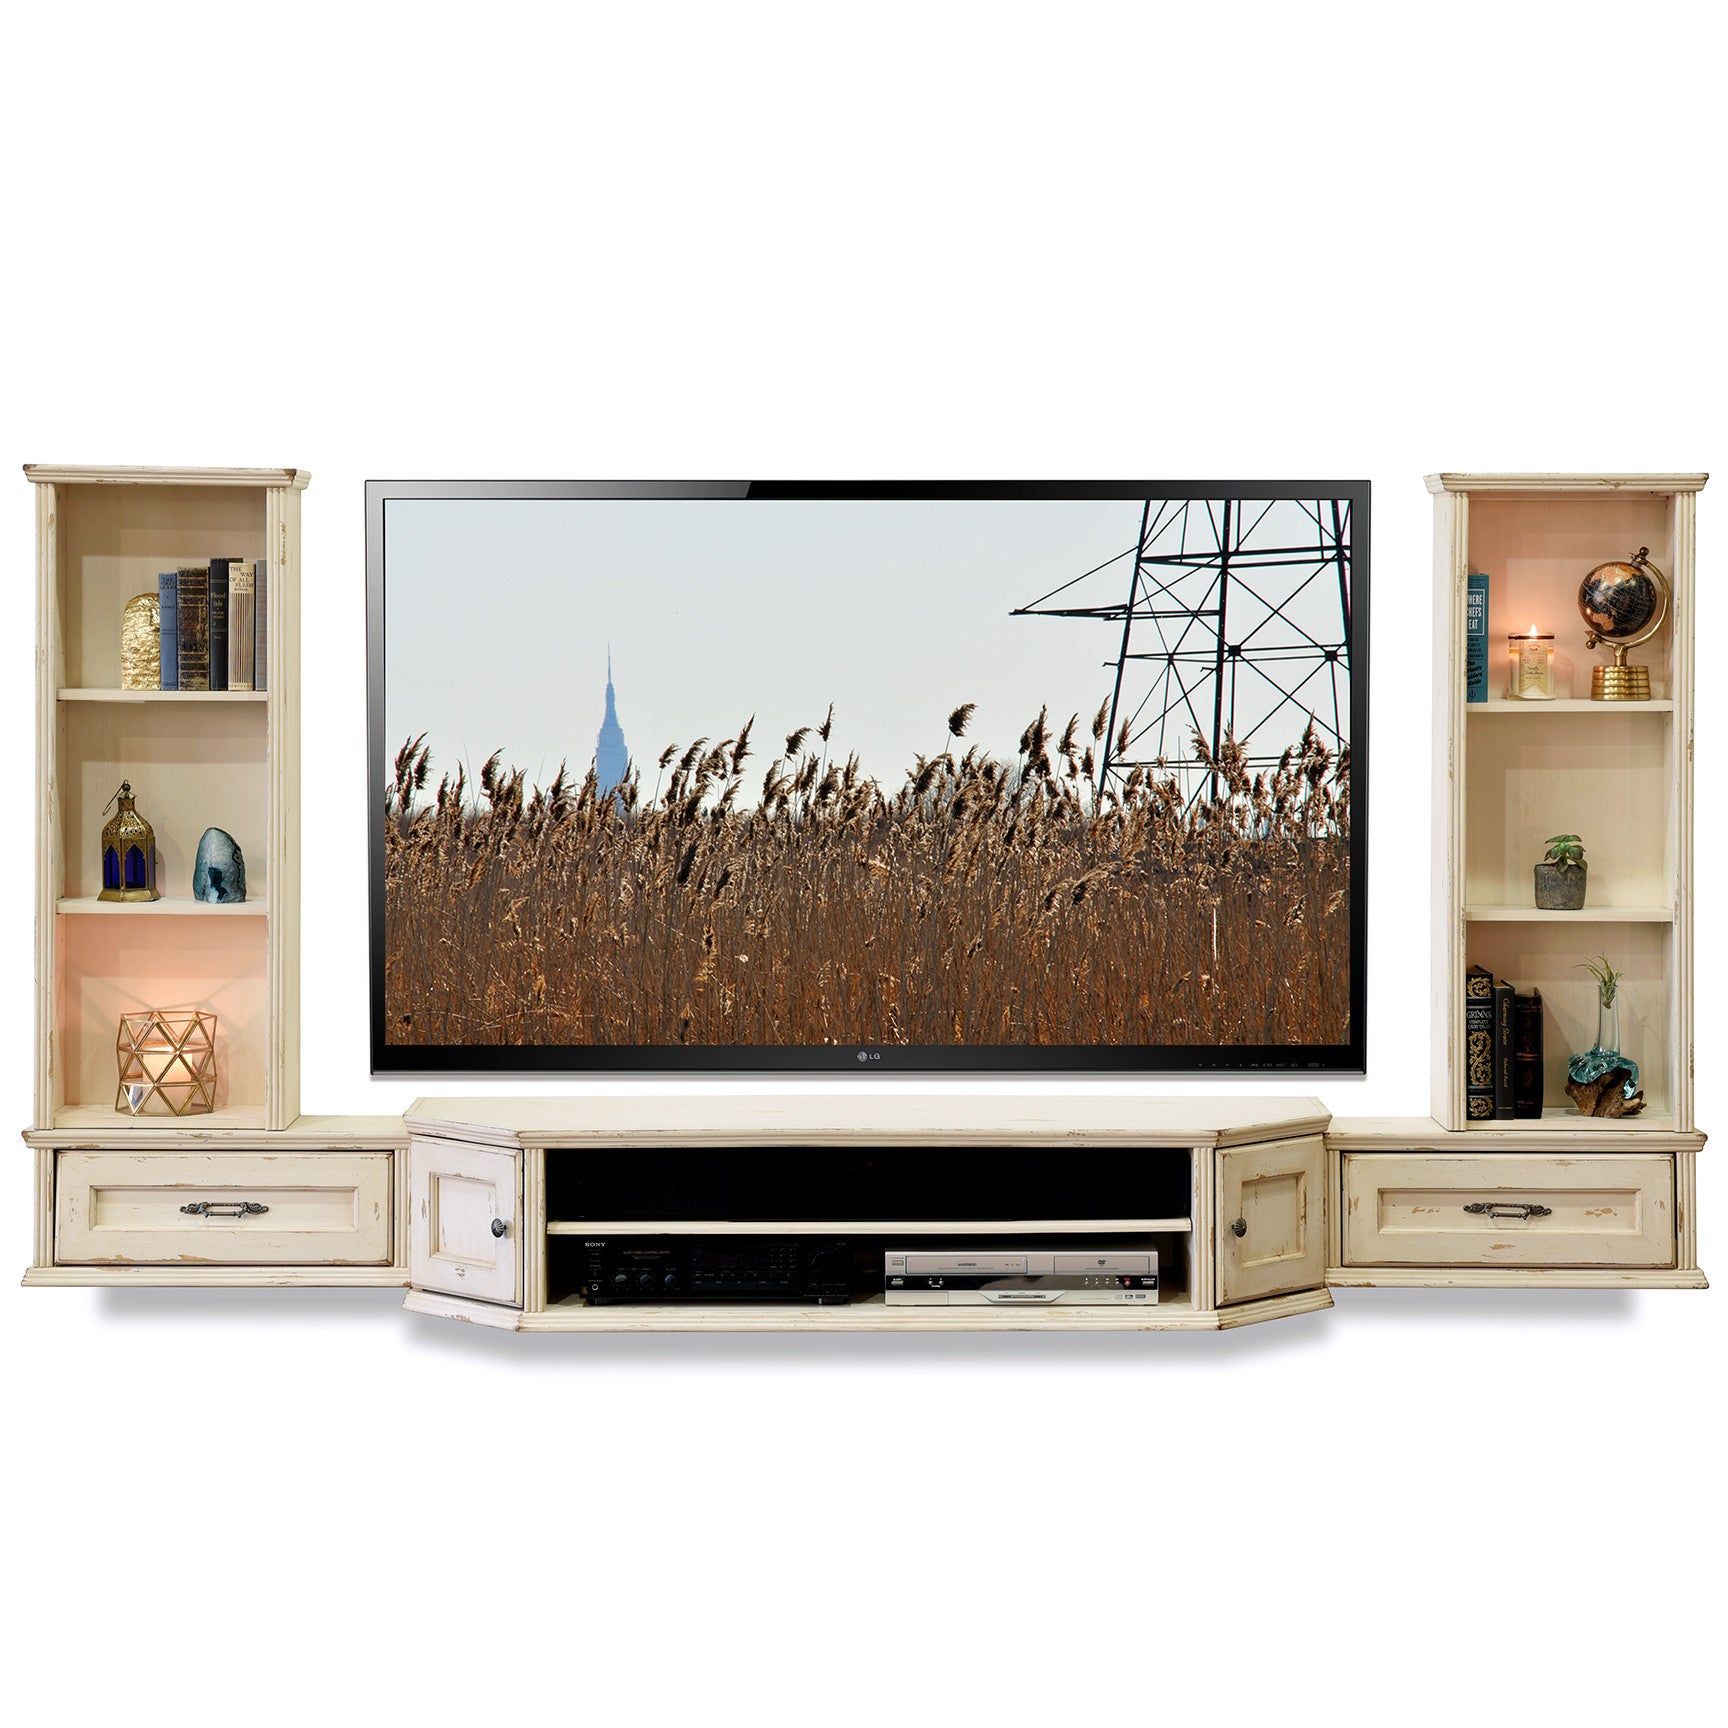 French Cottage Shabby Chic Floating Entertainment Center TV Stand ... - French Cottage Shabby Chic Floating Entertainment Center TV Stand - Vintage  - 3 Piece & Bookcases - Antique White